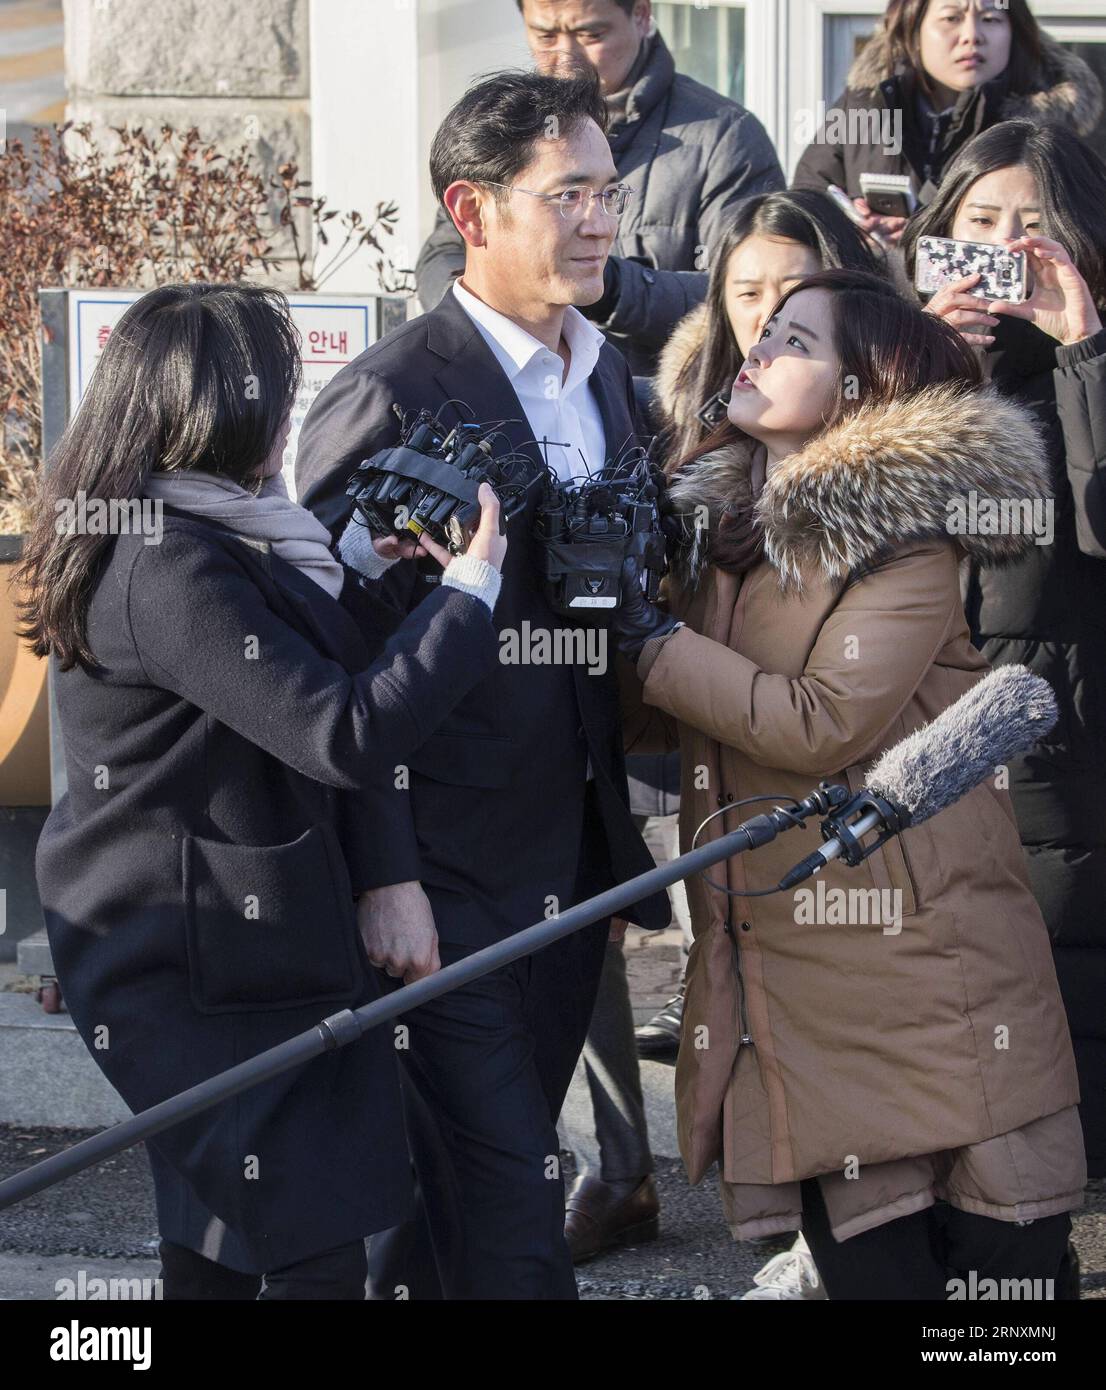 (180205) -- UIWANG, Feb. 5, 2018 -- Lee Jae-yong (2nd L), vice chairman of Samsung Electronics, speaks to the media outside a detention center in Uiwang, South Korea, on Feb. 5, 2018. A judge at the Seoul High Court Monday sentenced Lee Jae-yong, an heir apparent of Samsung Group, the country s biggest family-controlled conglomerate, to two and a half years in prison with a stay of execution for four years. ) (zjl) SOUTH KOREA-UIWANG-SAMSUNG-HEIR-SENTENCE LeexSang-ho PUBLICATIONxNOTxINxCHN Stock Photo